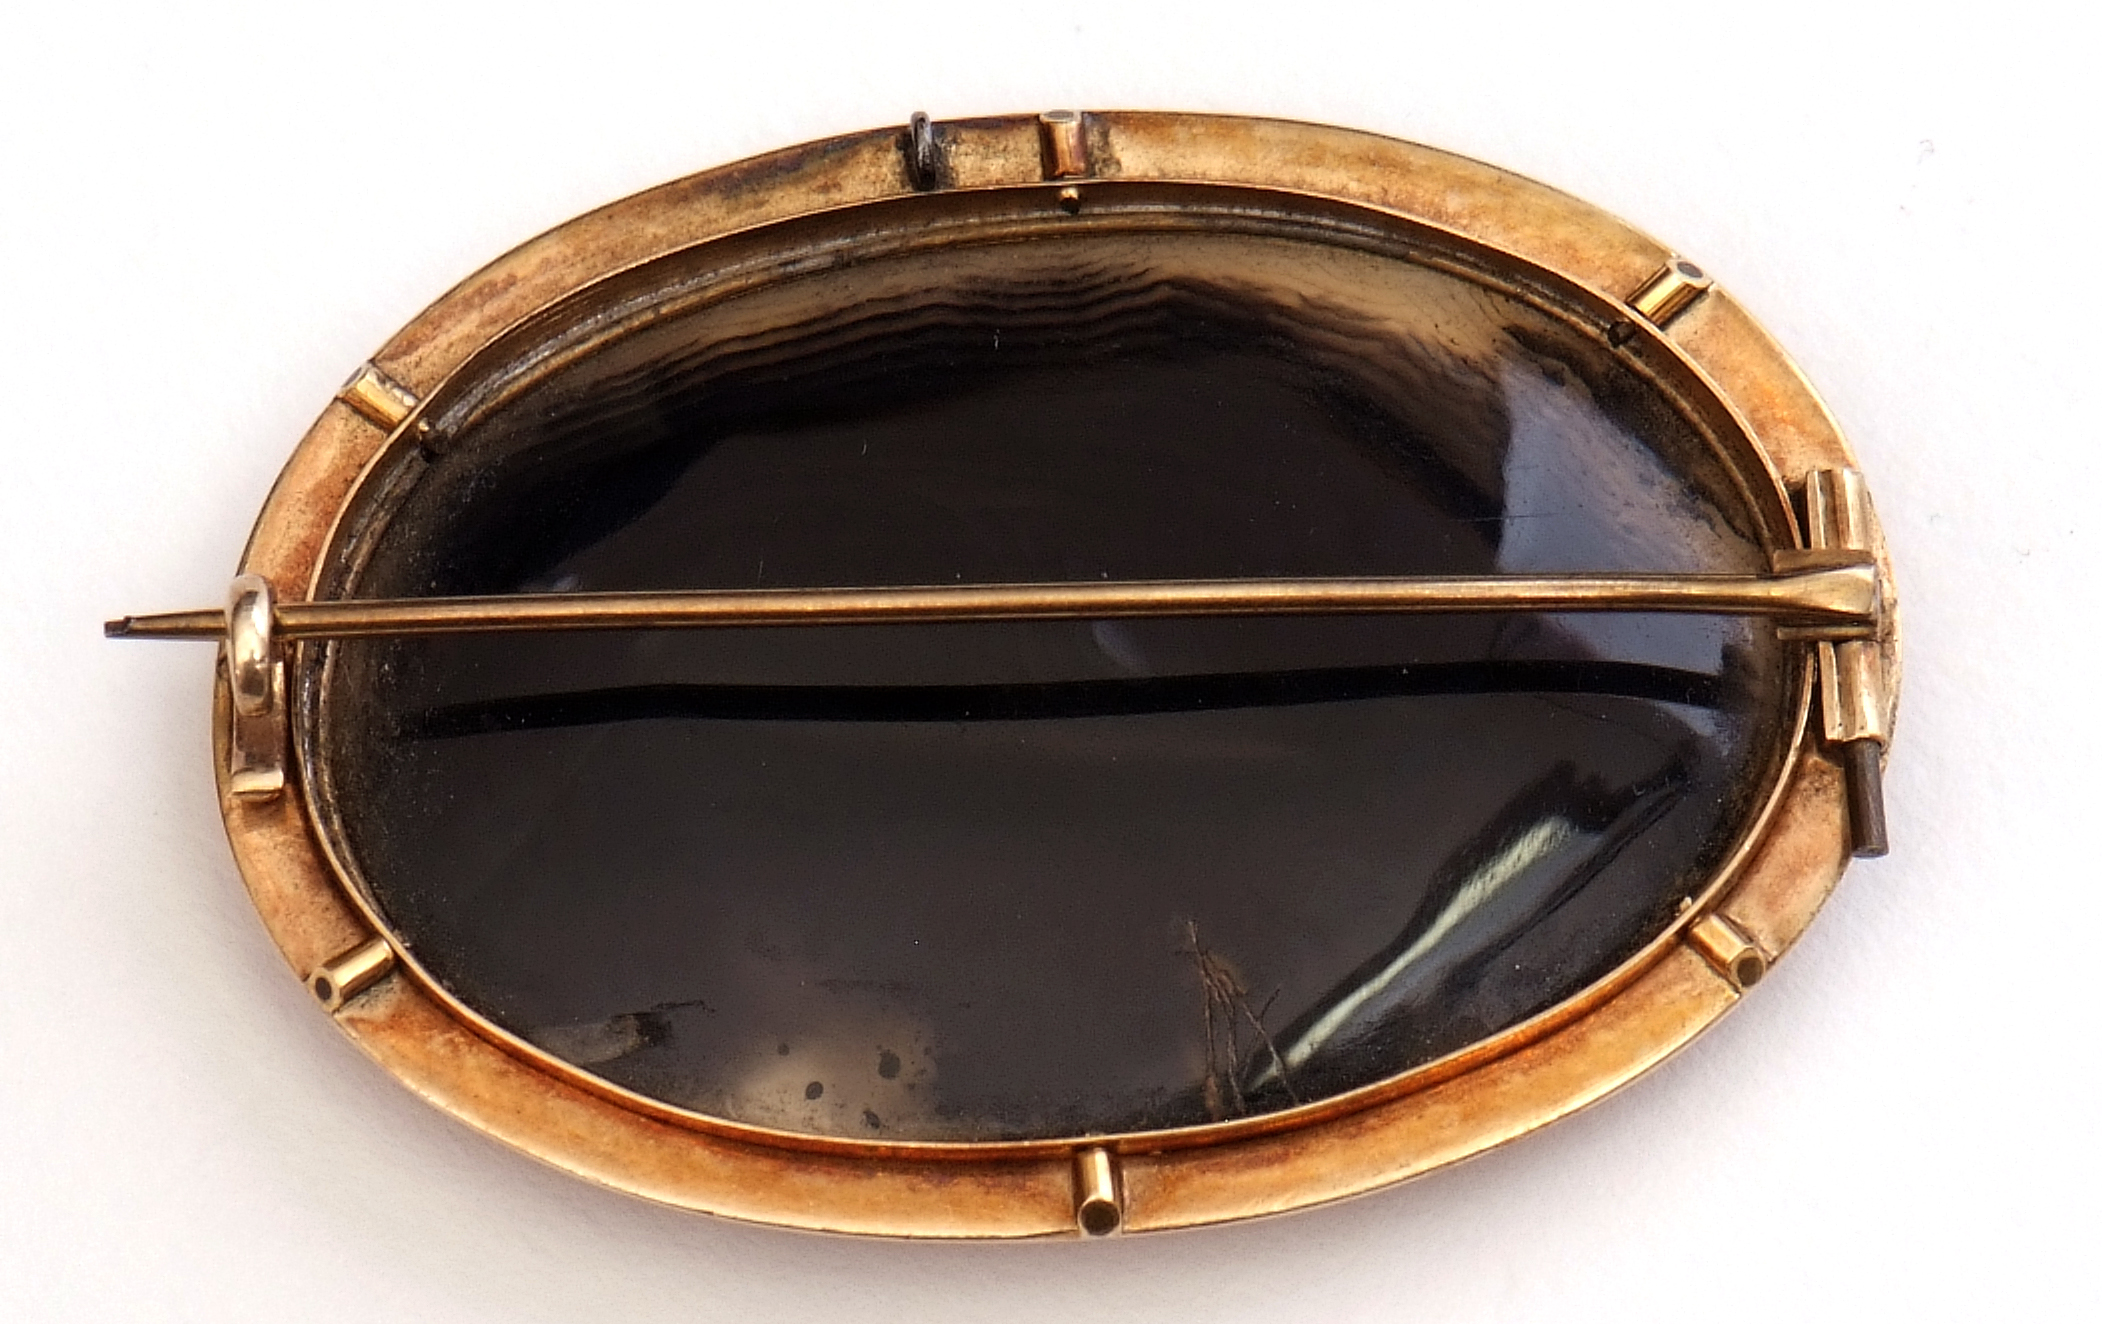 Victorian large agate brooch of oval shape framed in an ornate gold mount, 5 x 3cm - Image 2 of 2